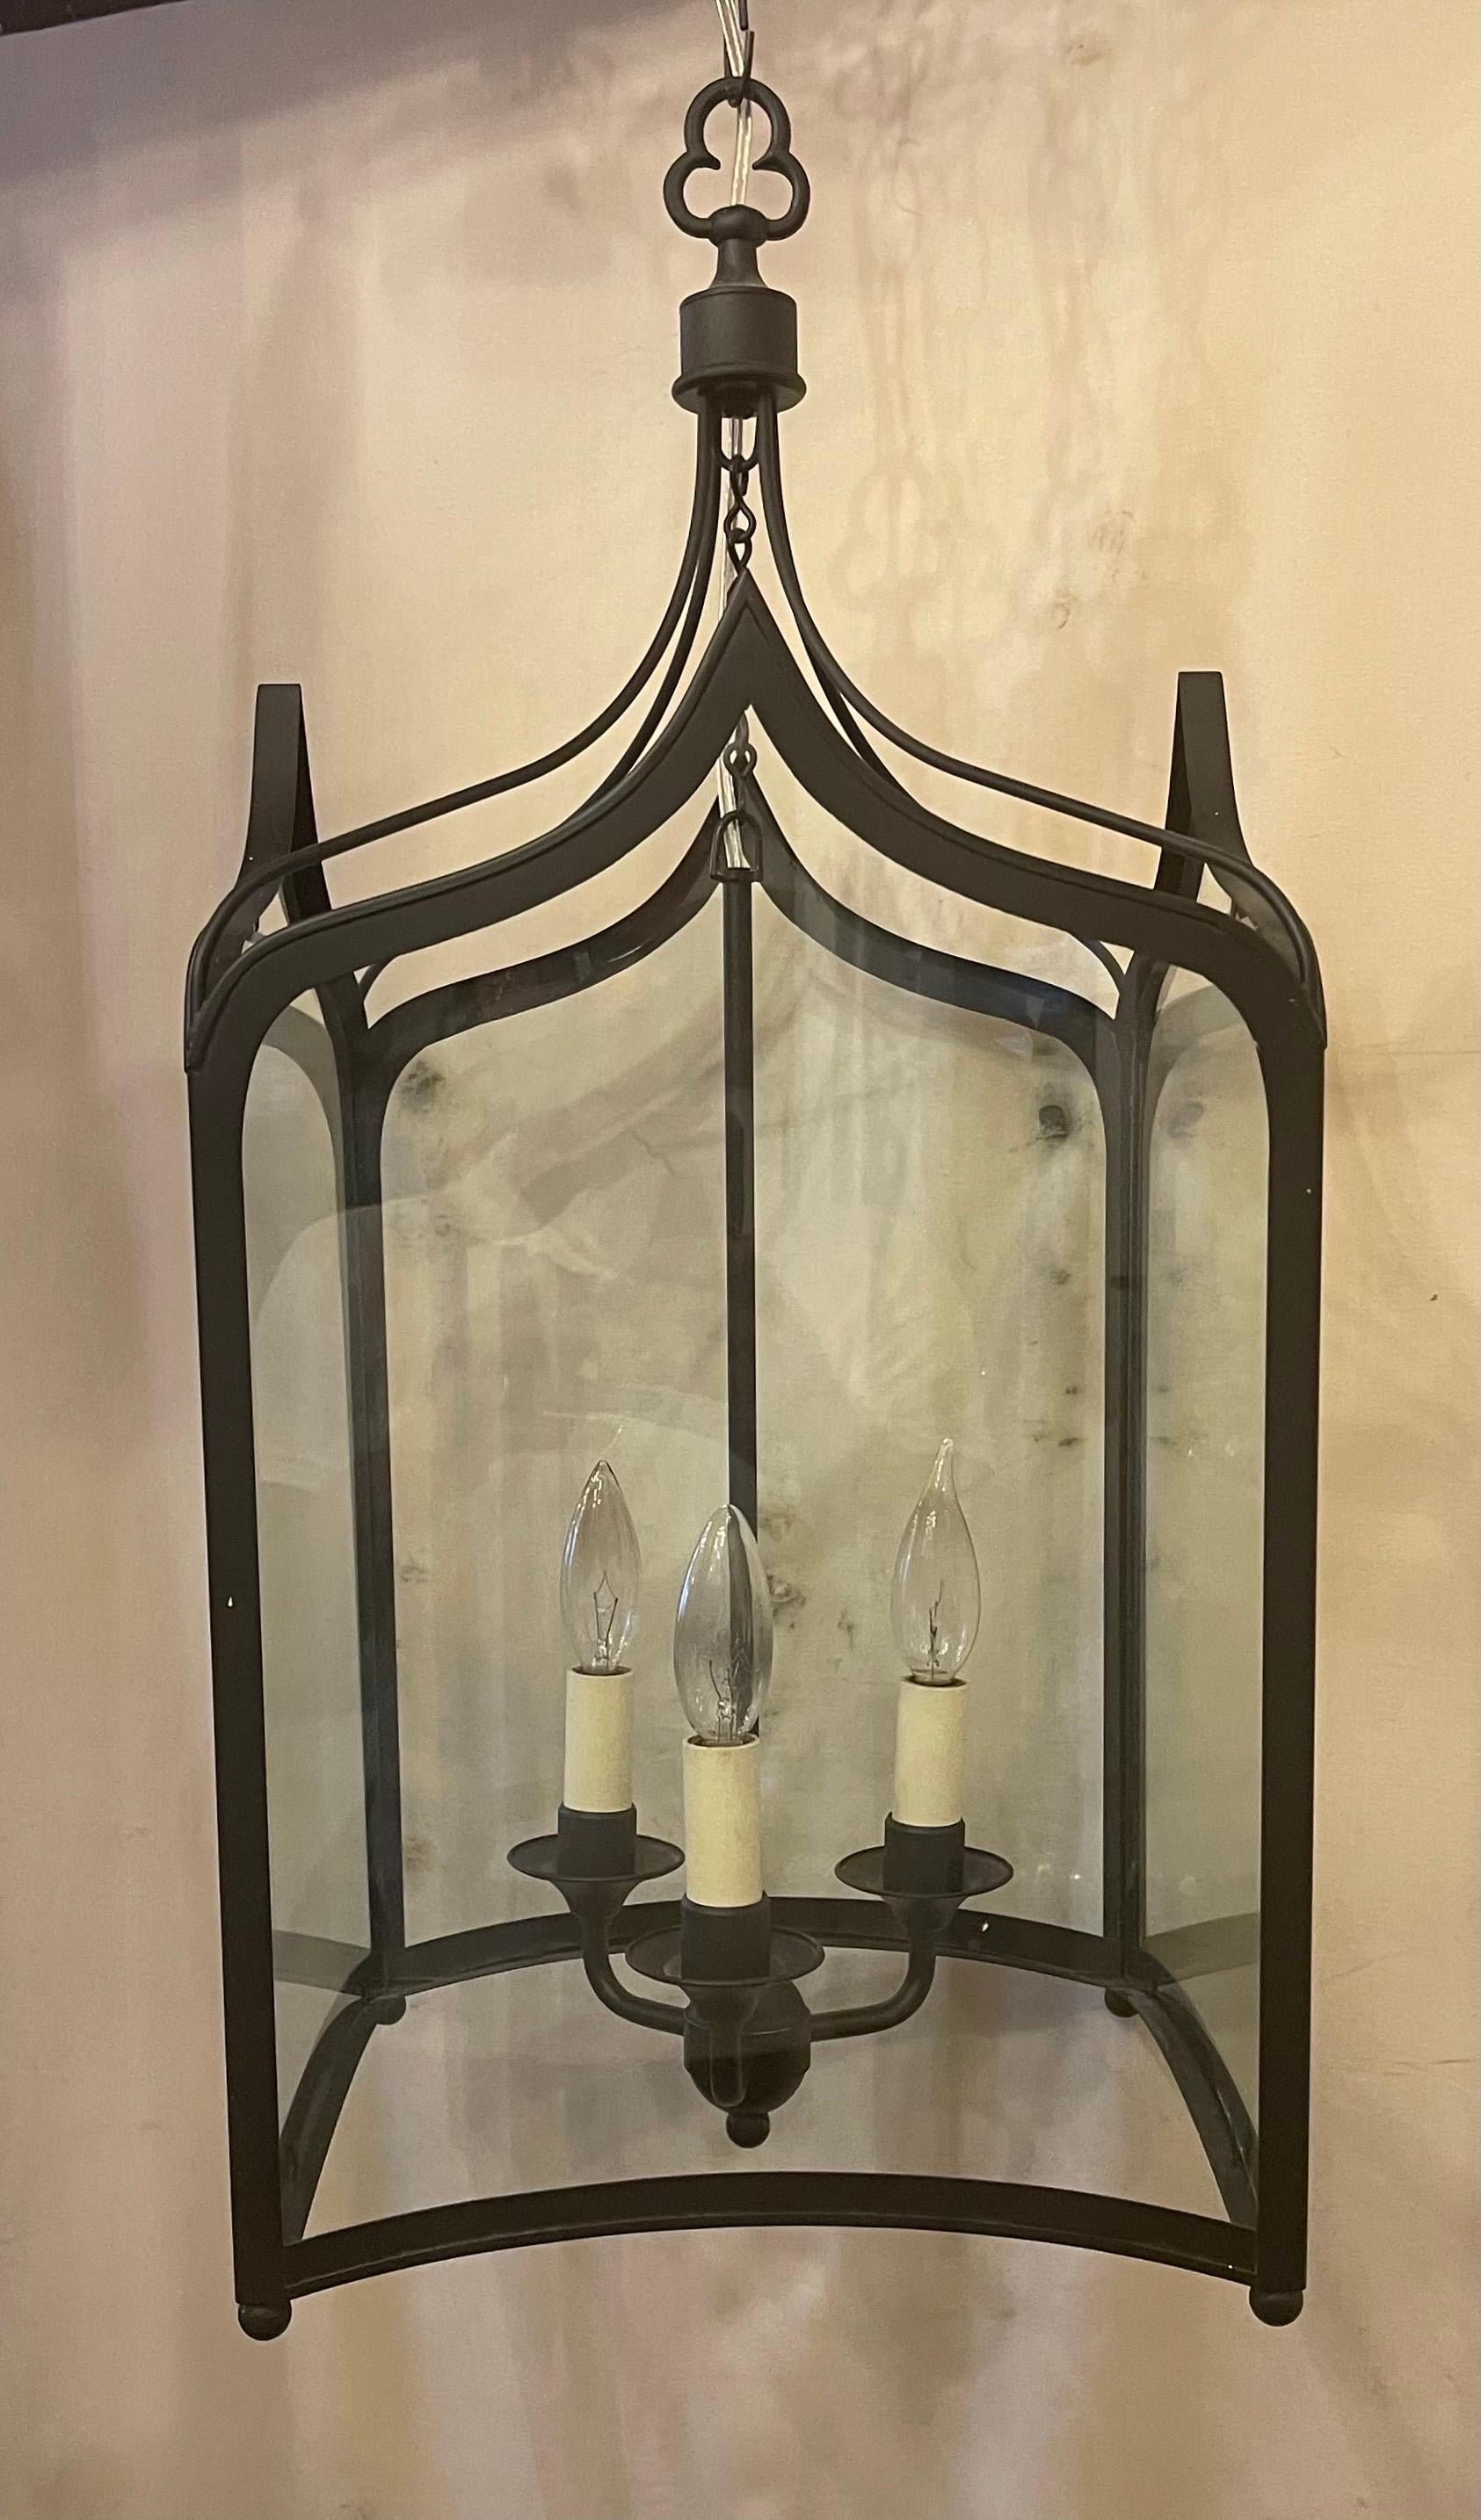 Wonderful Vaughan Lighting Regency Square Arched Black Iron 3 Lanterns Fixtures In Good Condition For Sale In Roslyn, NY